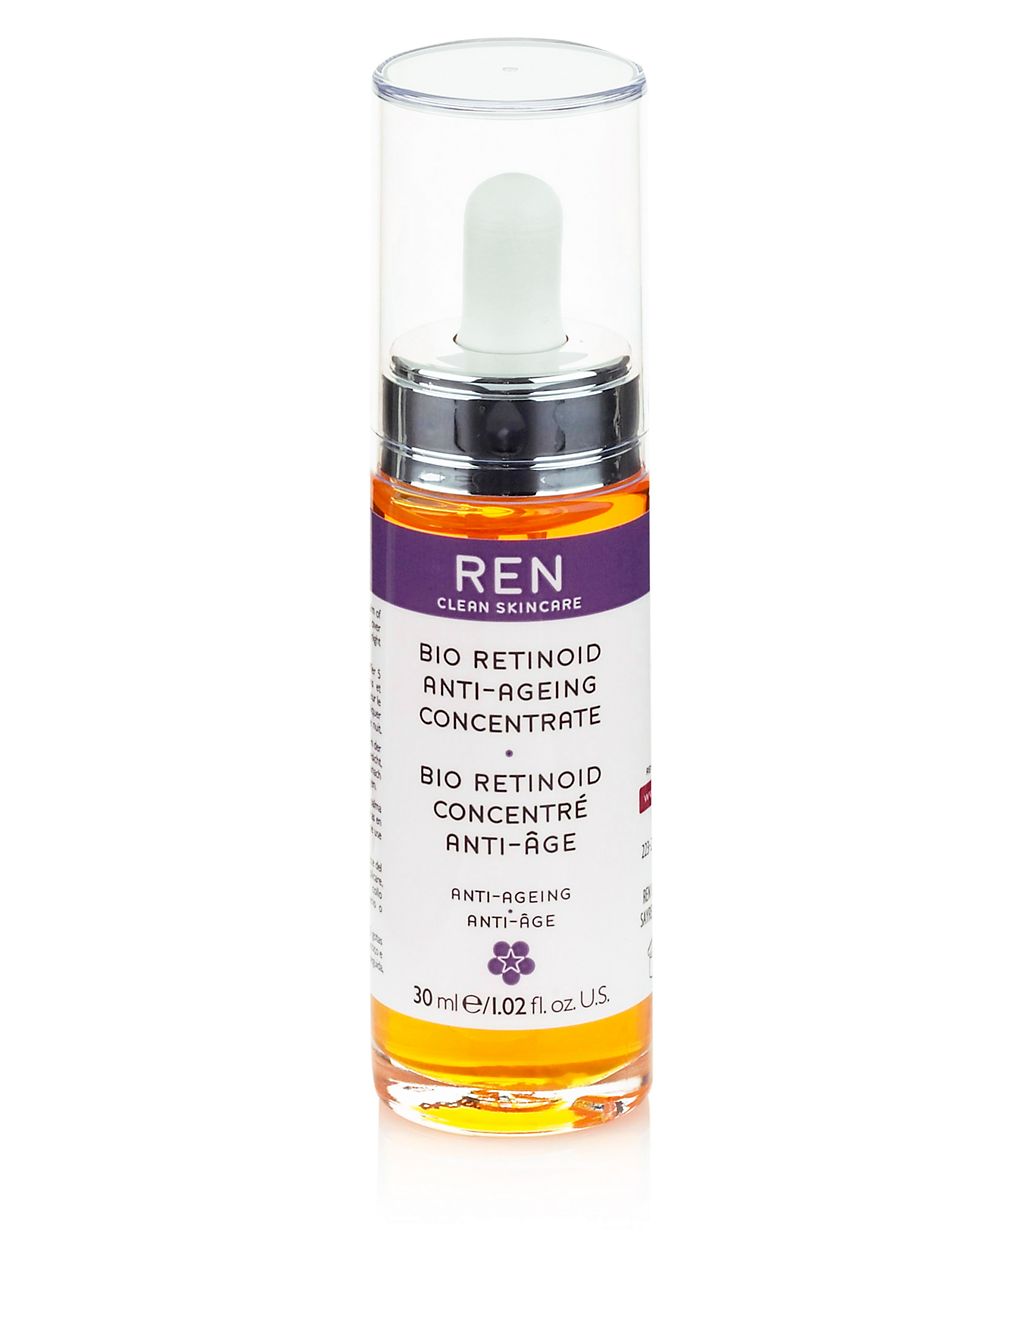 Bio Retinoid Anti-Ageing Concentrate 30ml 2 of 2